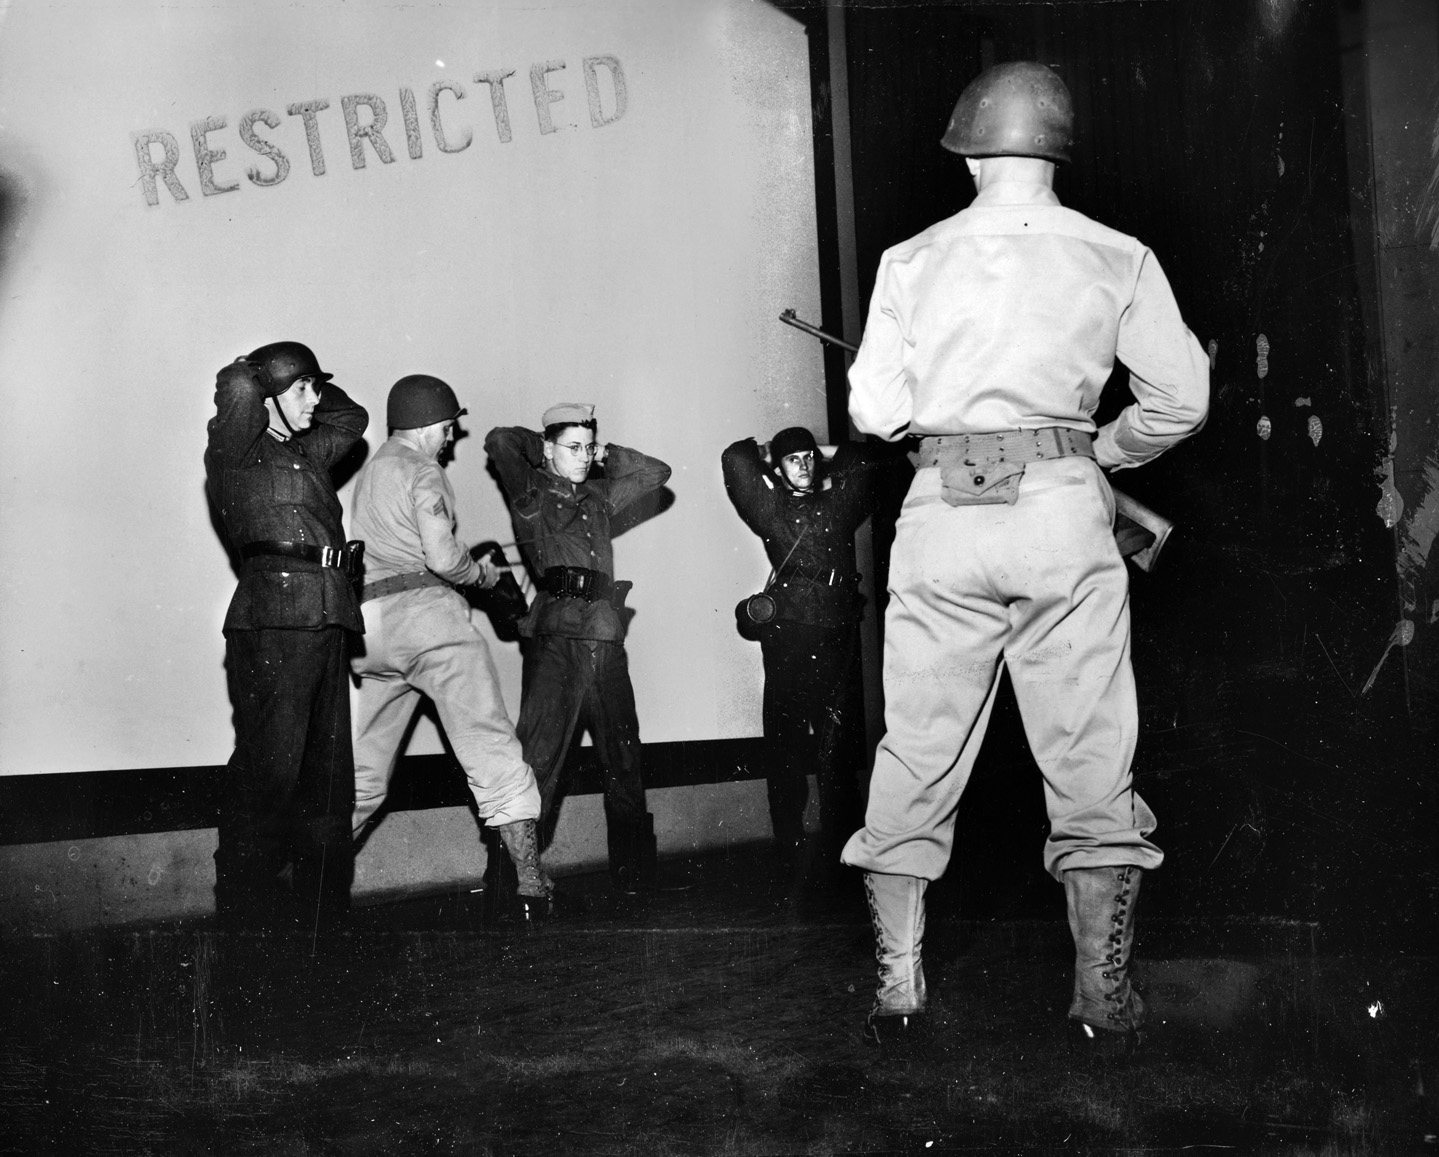 During a demonstration for Army personnel, a team of interrogators from Camp Ritchie demonstrates the proper method for searching prisoners of war.  Three members of the interrogation team are wearing German uniforms.